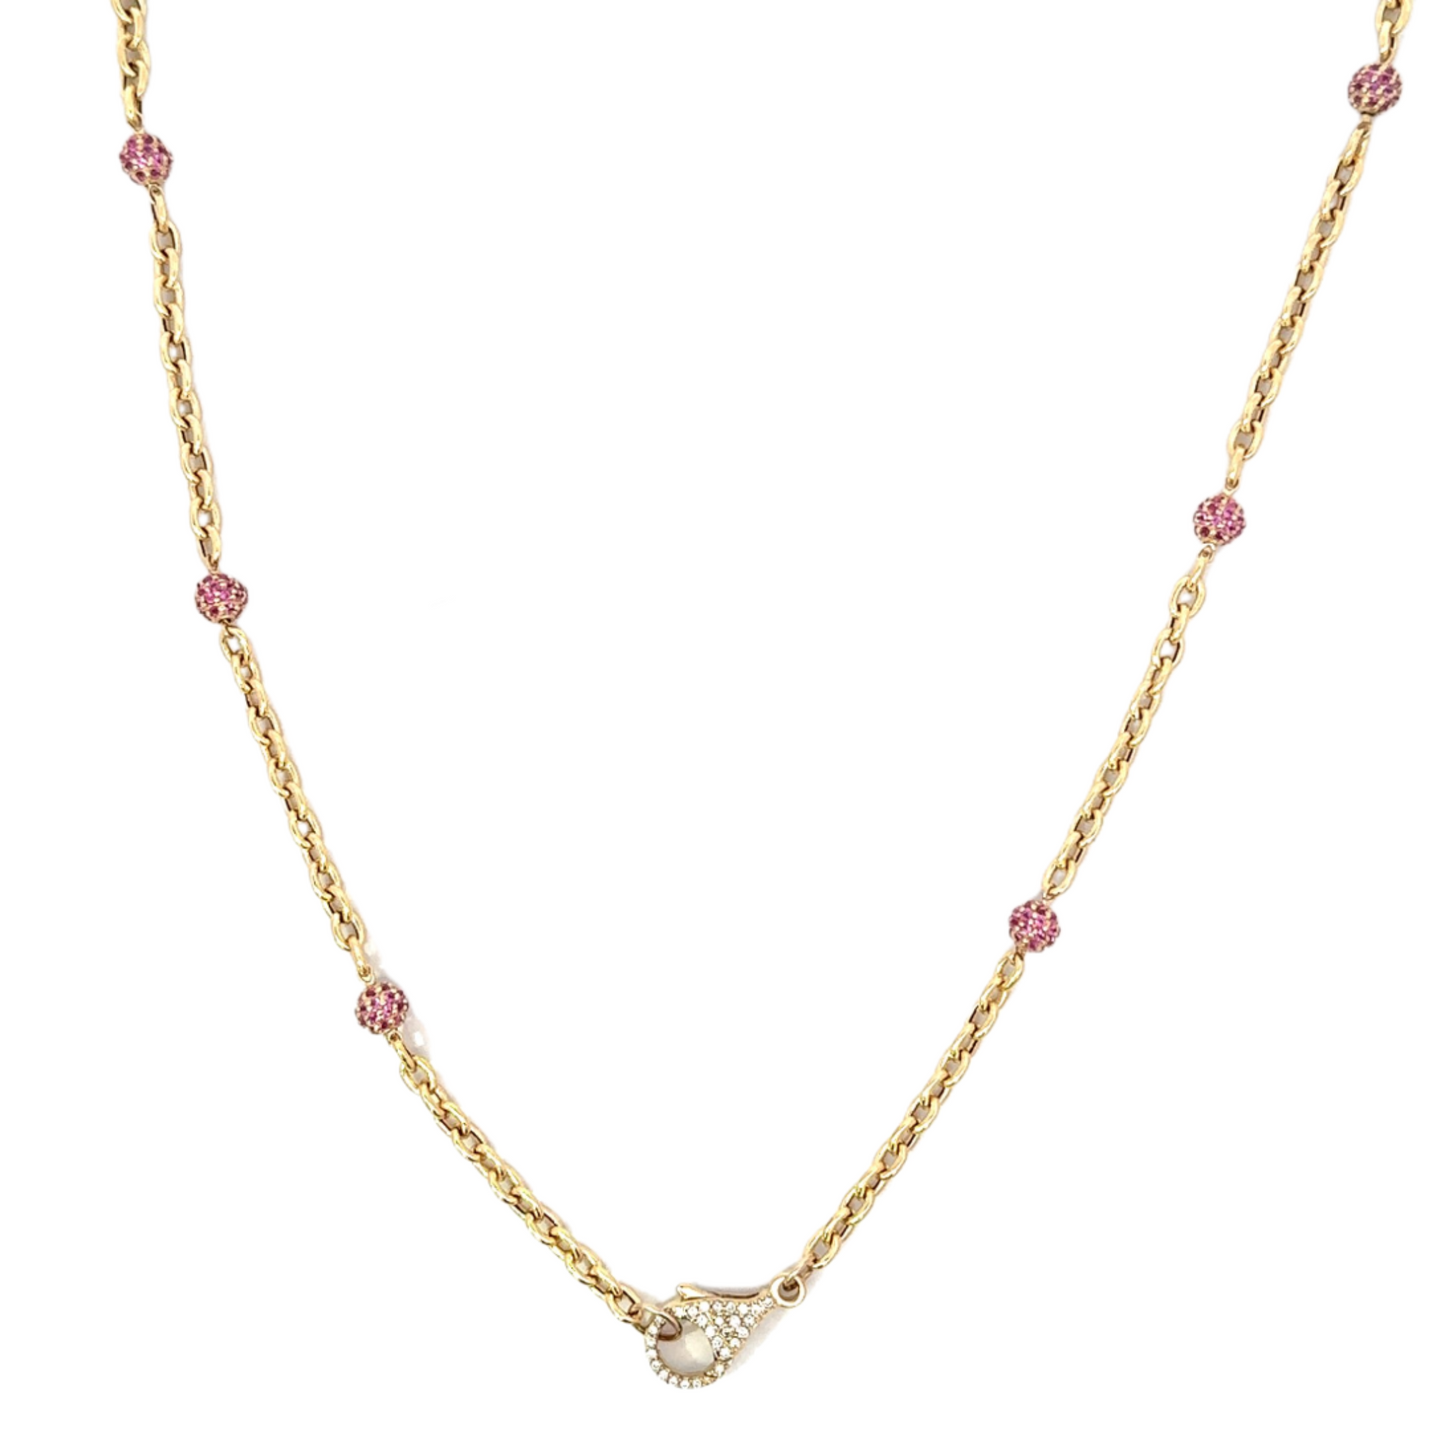 Yellow Gold Oval Link Necklace with Ruby Bead Accents and Tiny Pave Lobster